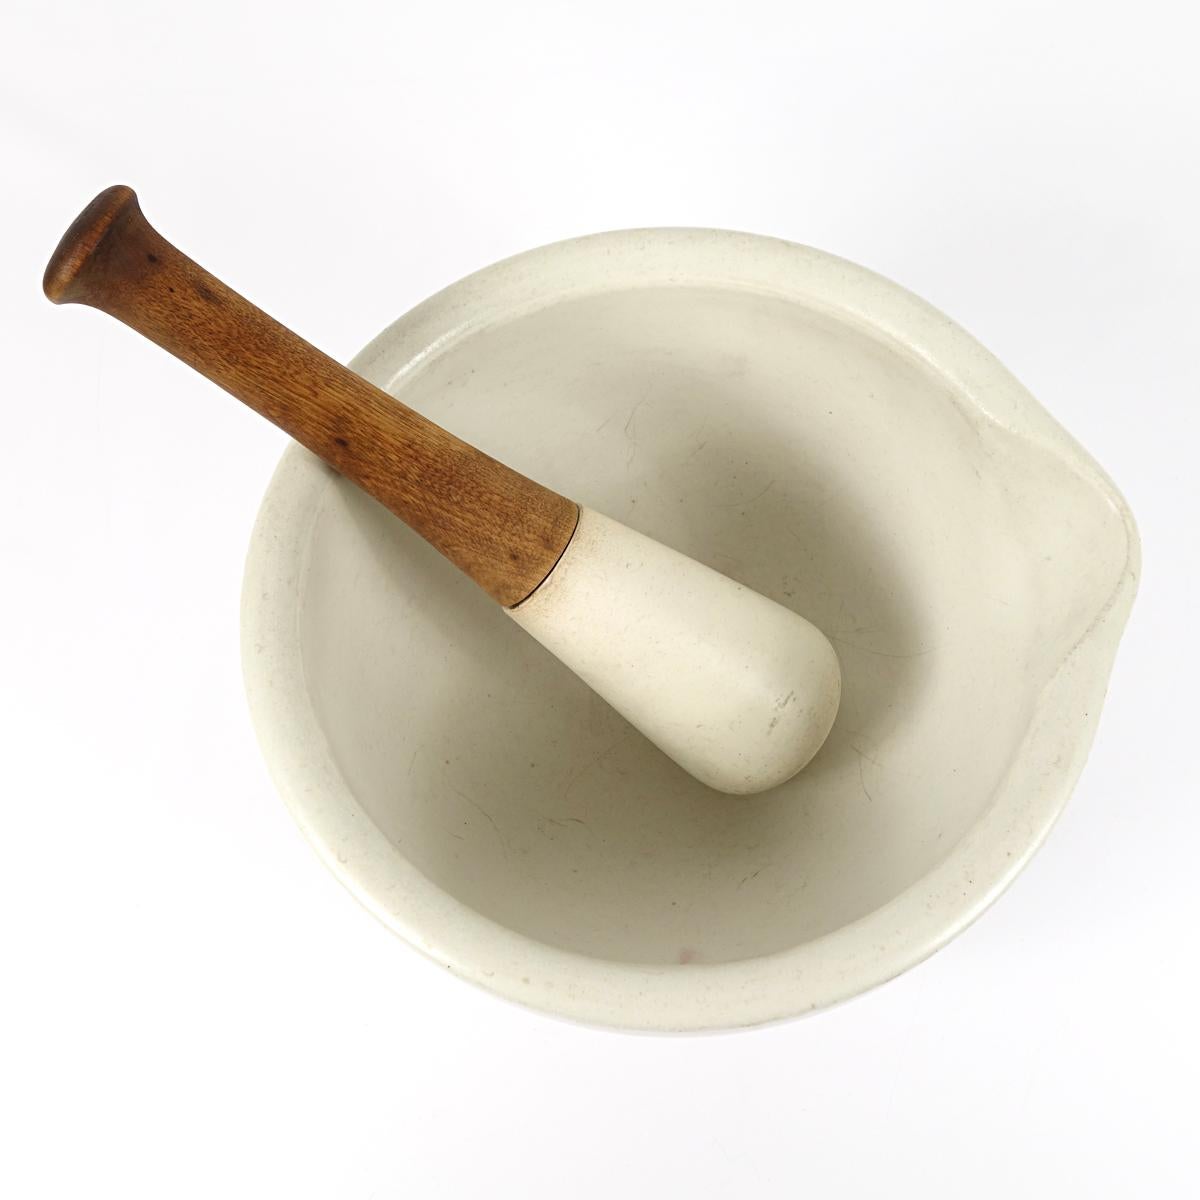 extra large wooden mortar and pestle